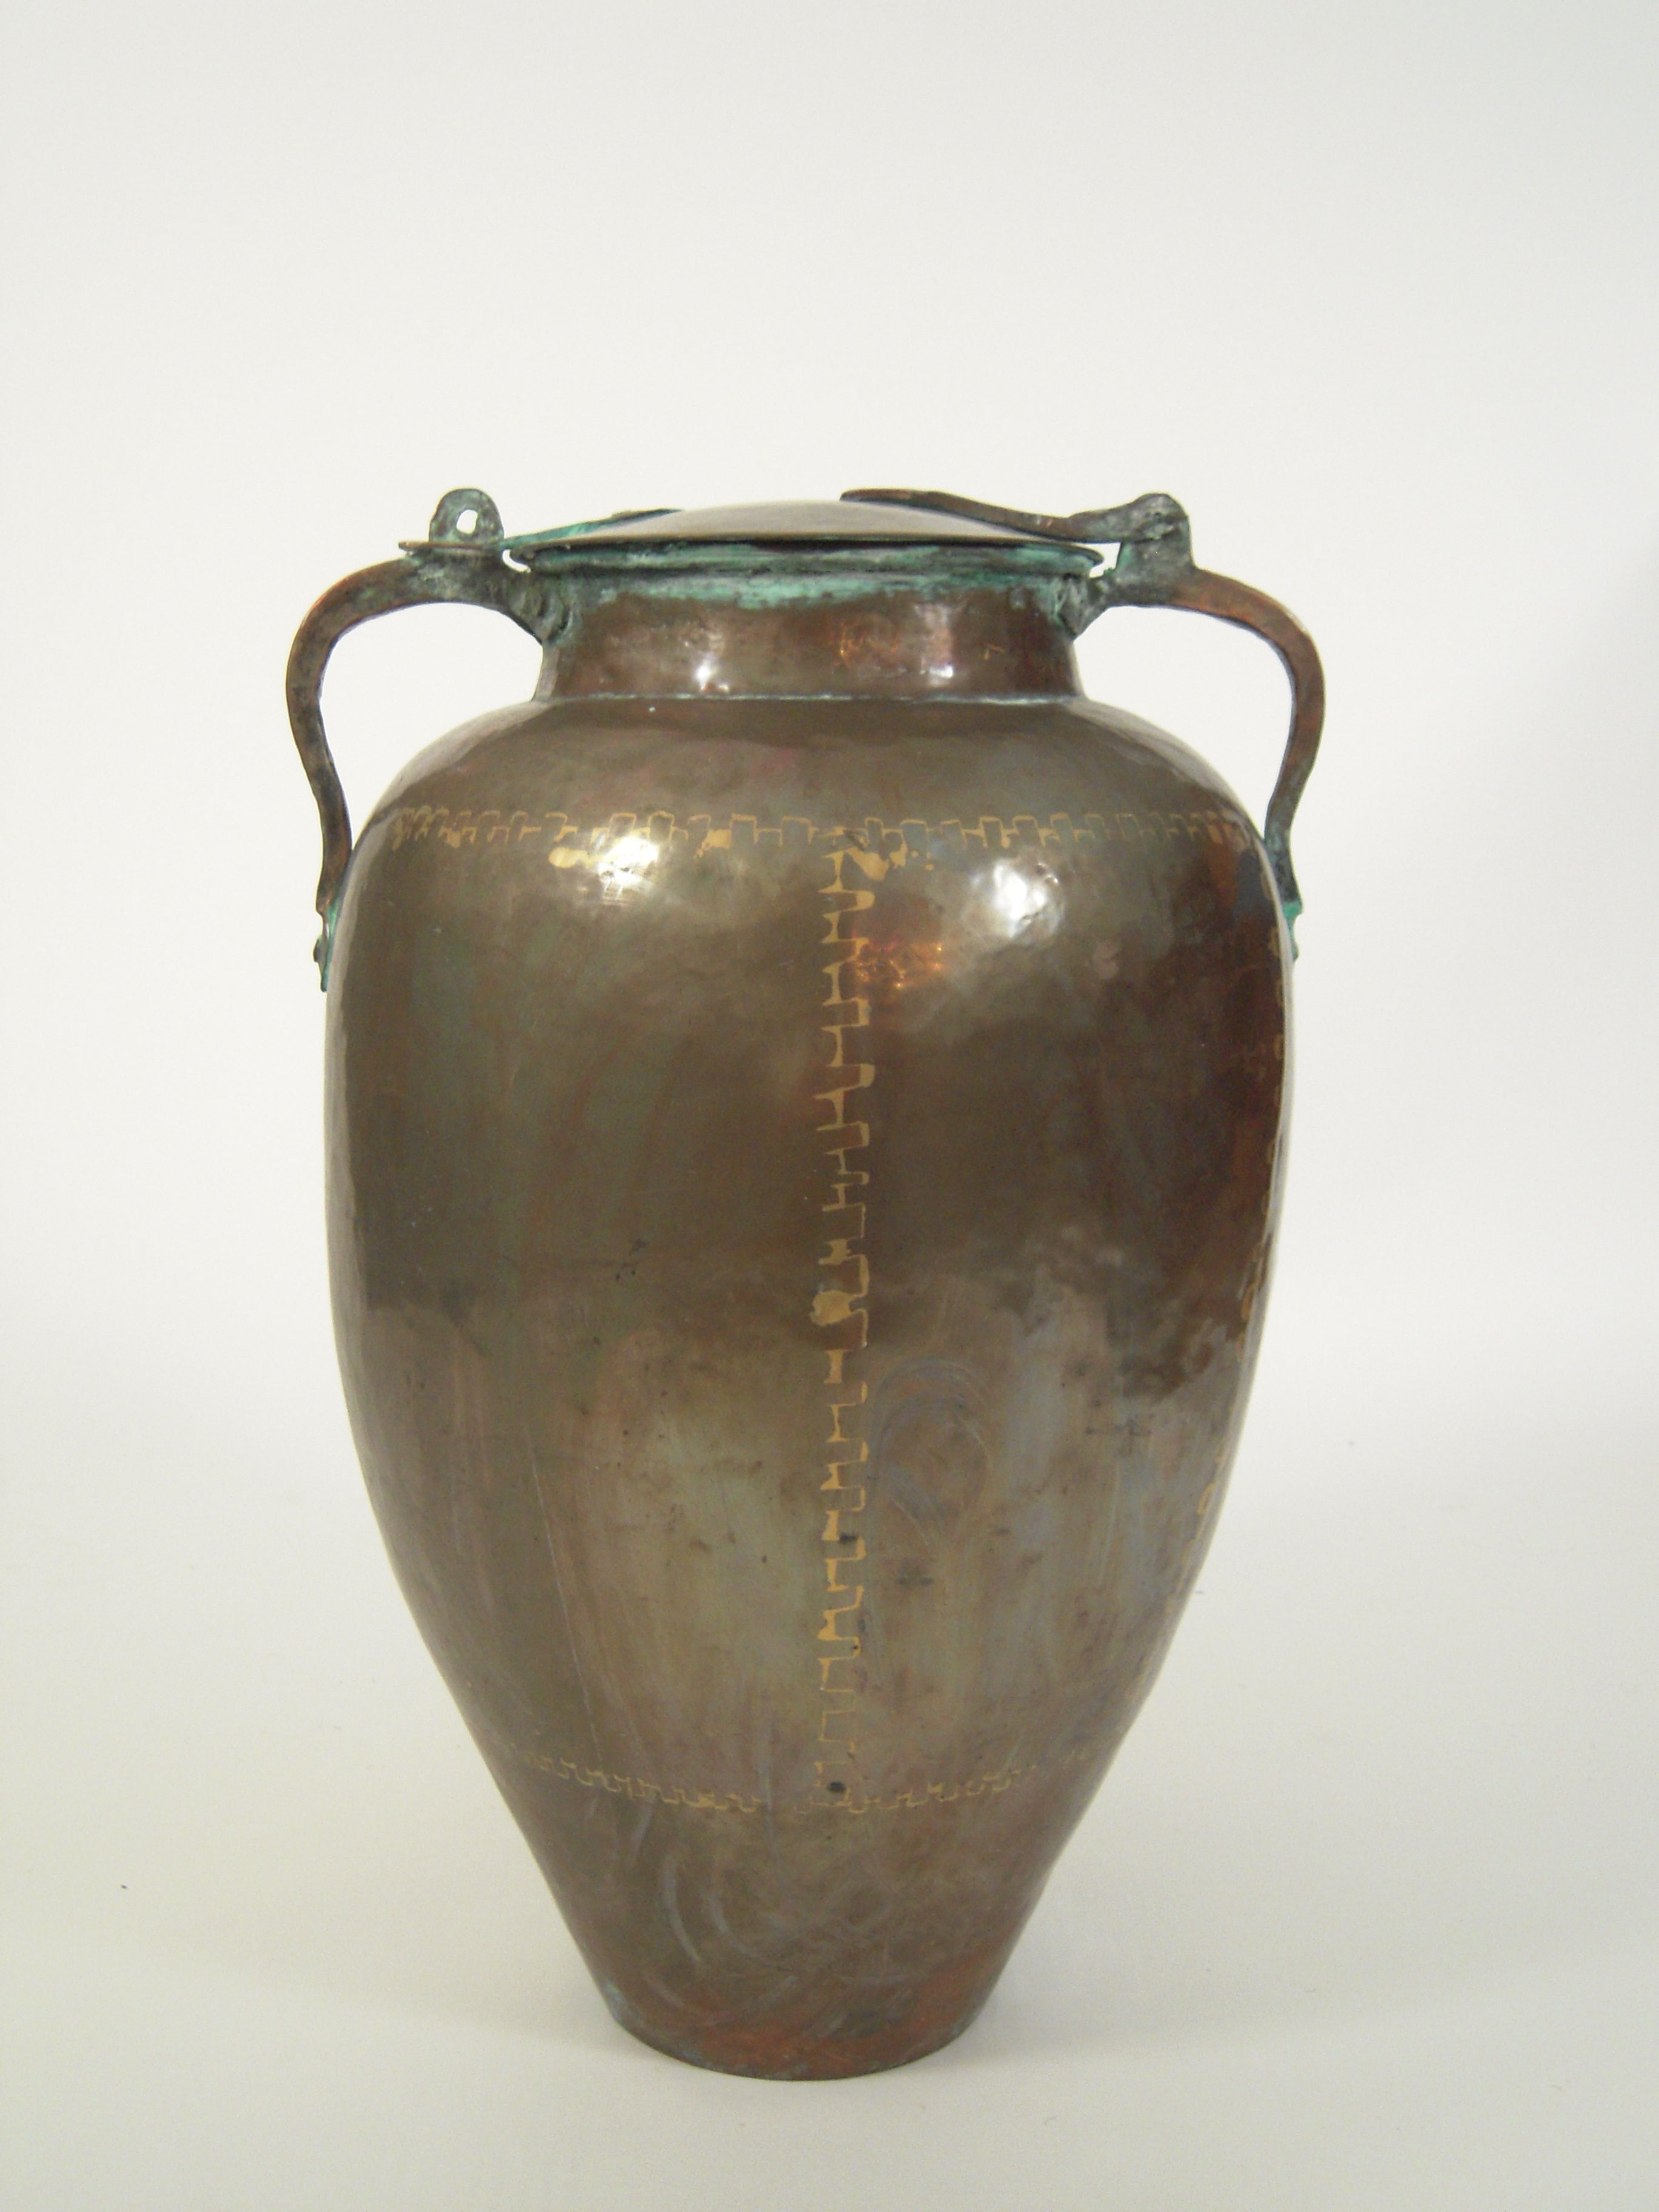 Large Persian Hand Made Copper Storage Jar